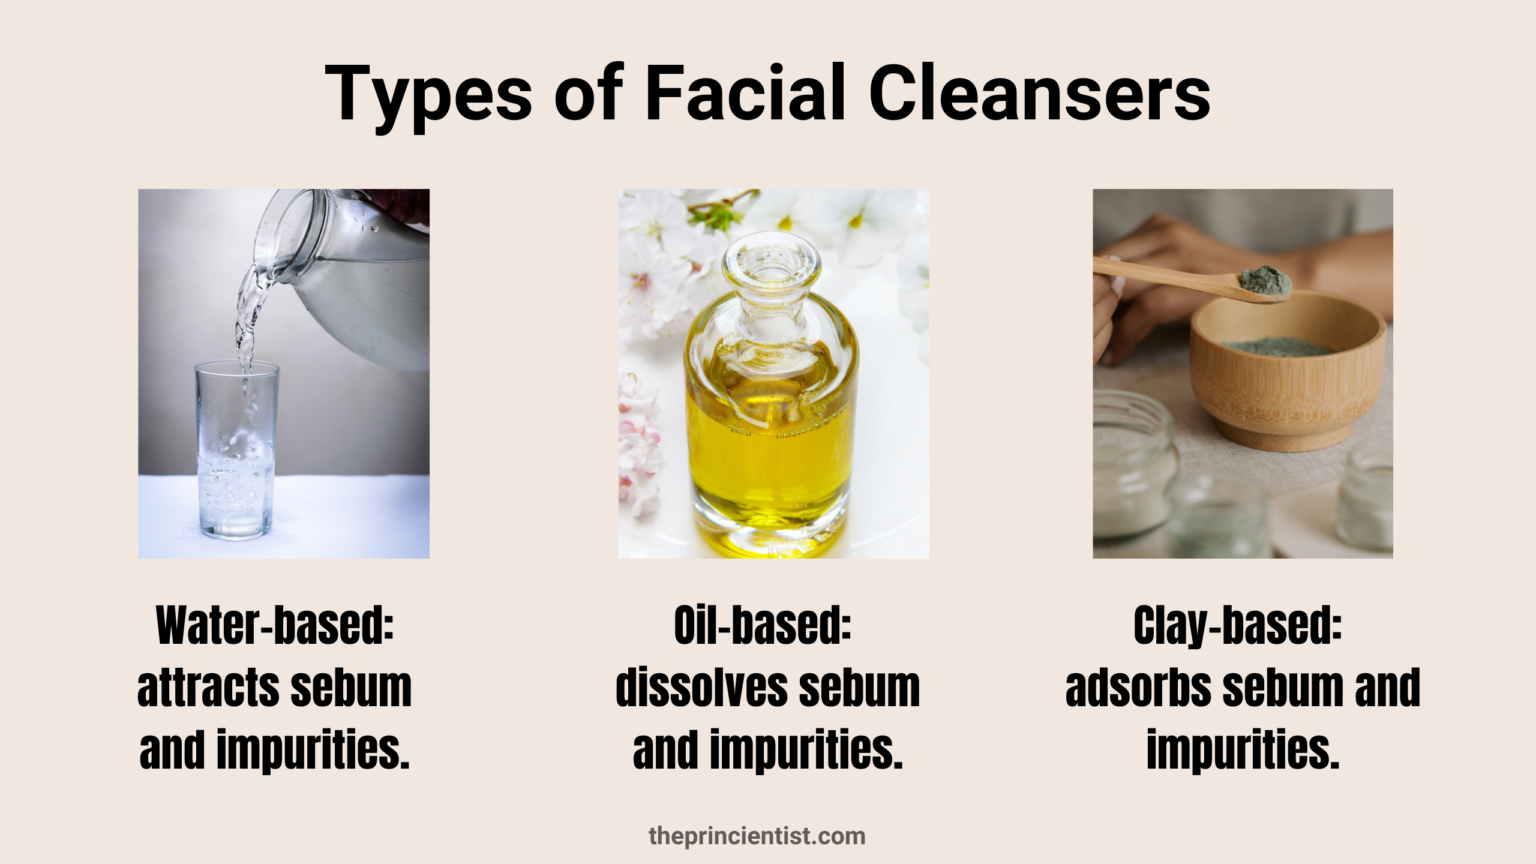 what is a facial cleanser - 3 different types existing: water, oil and clay-based and how they clean differently